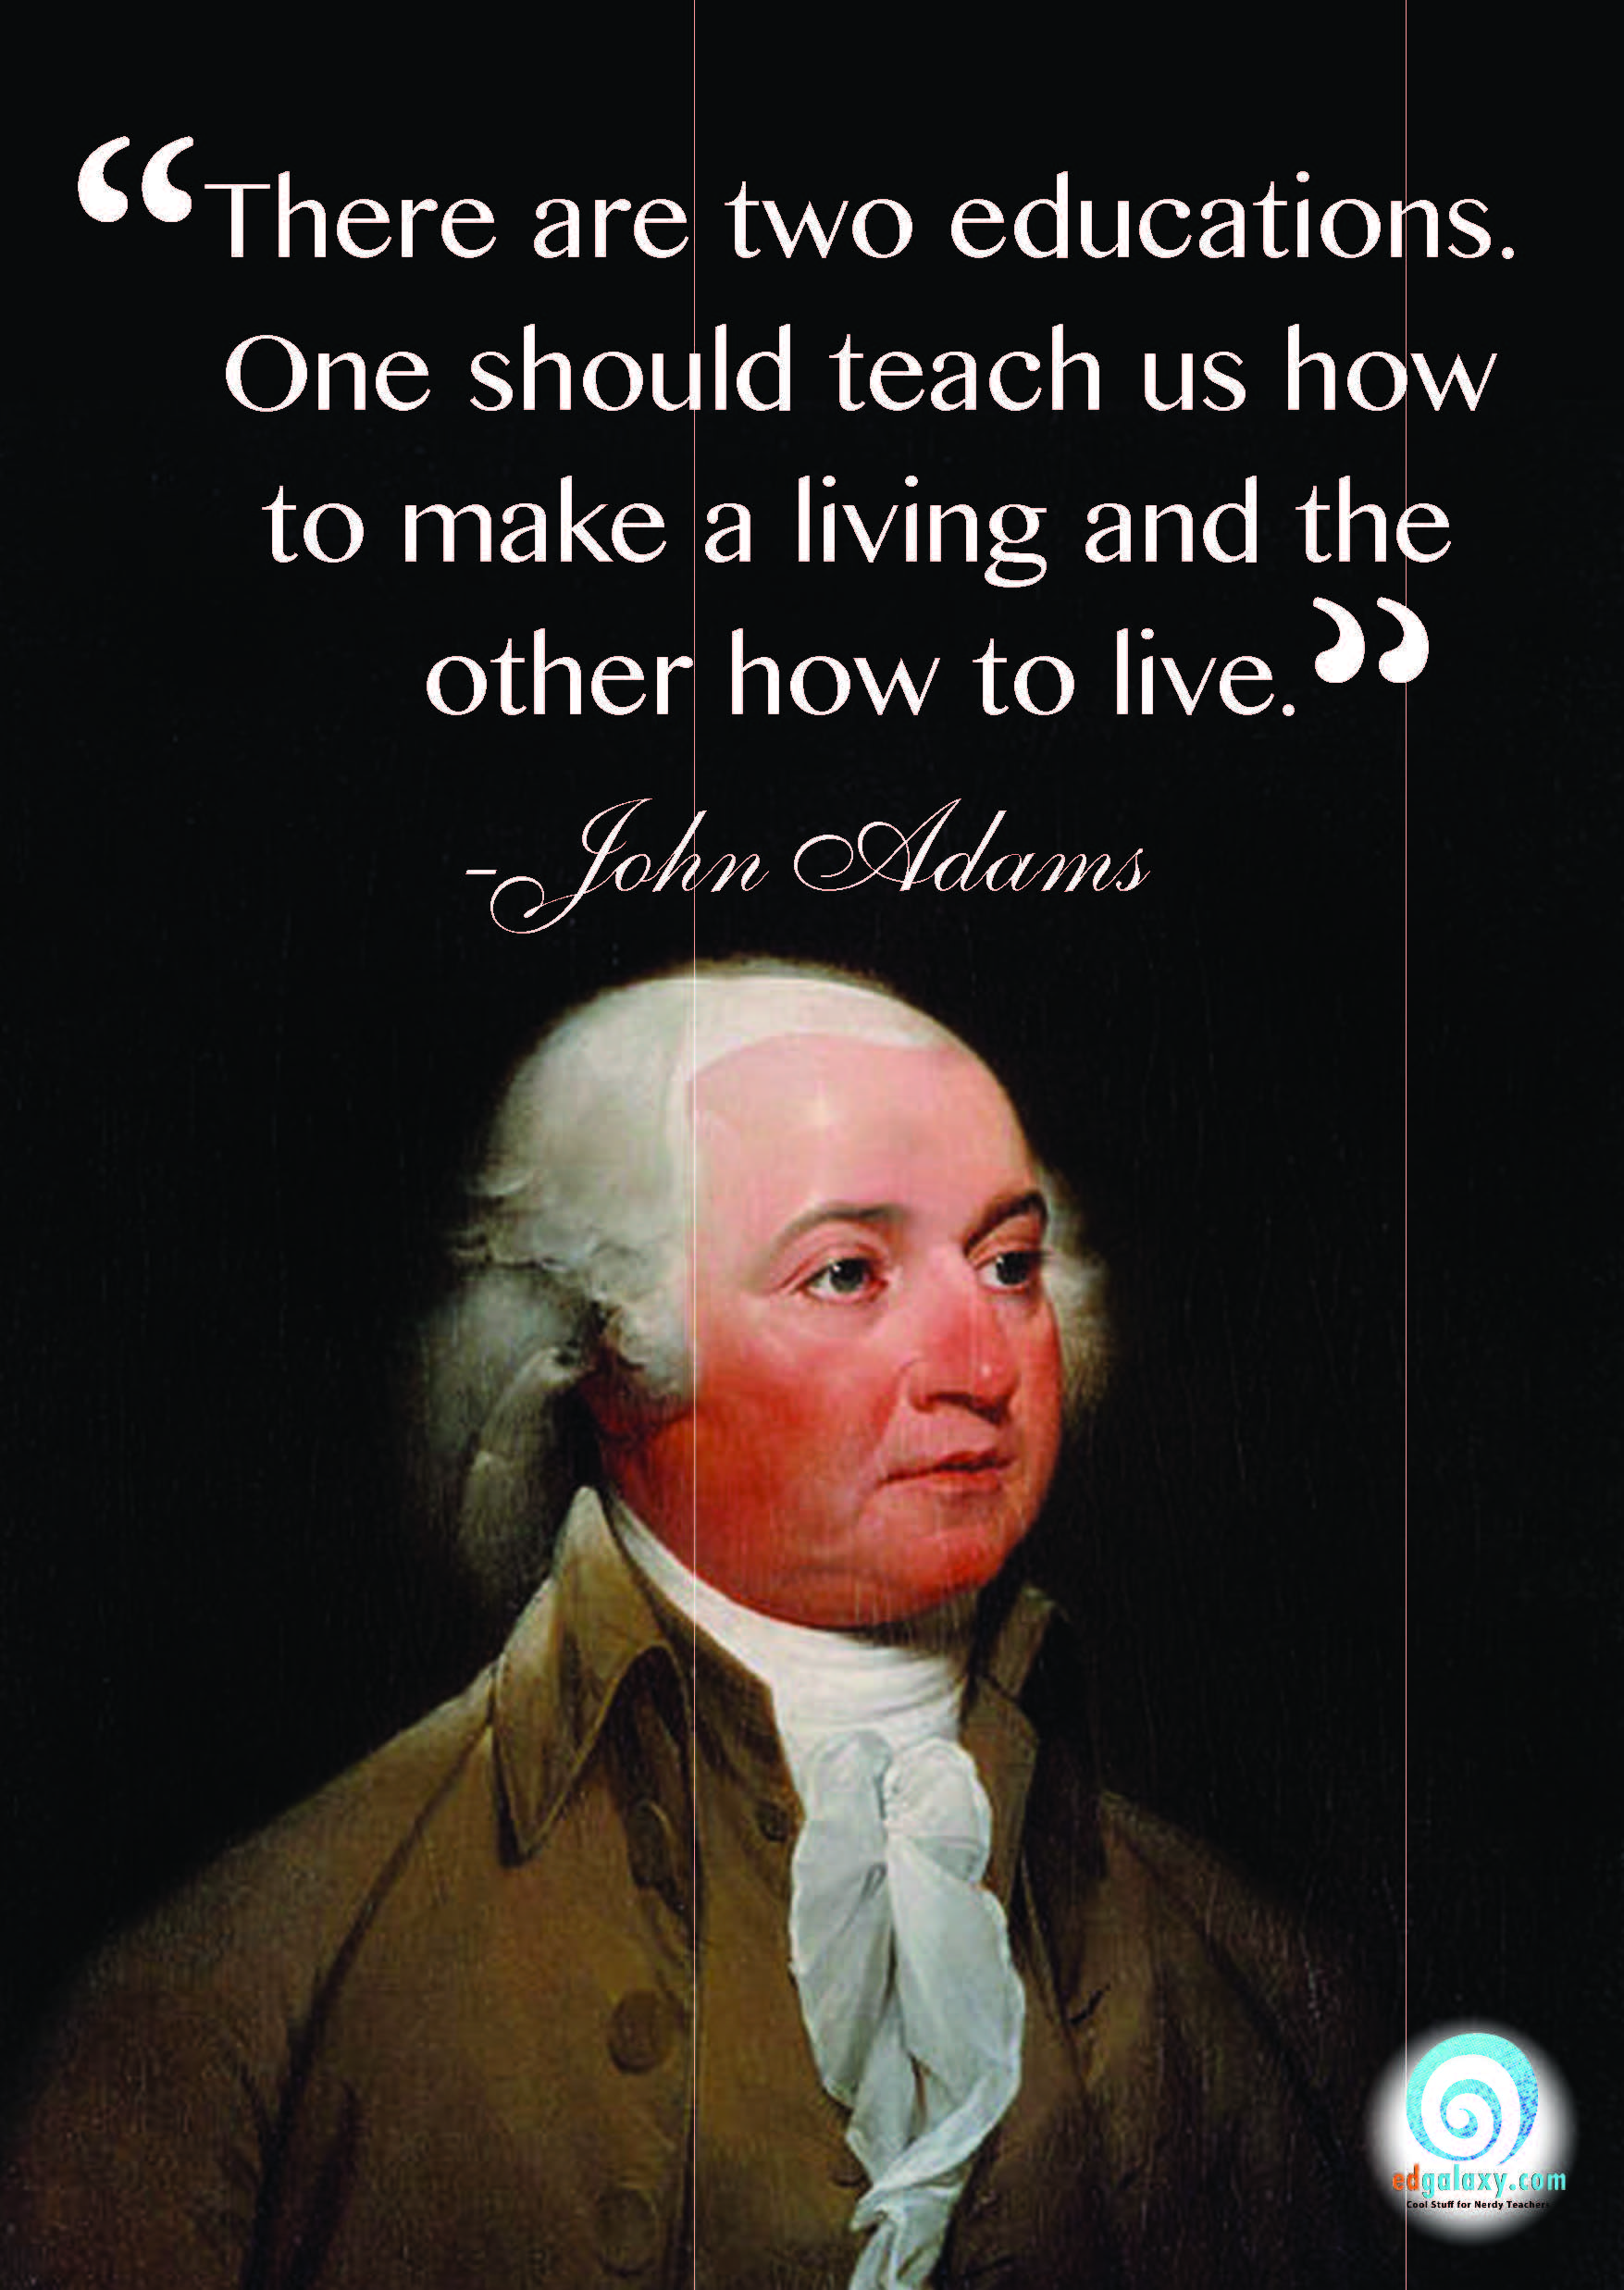 Education Quotes Famous Quotes For Teachers And Students